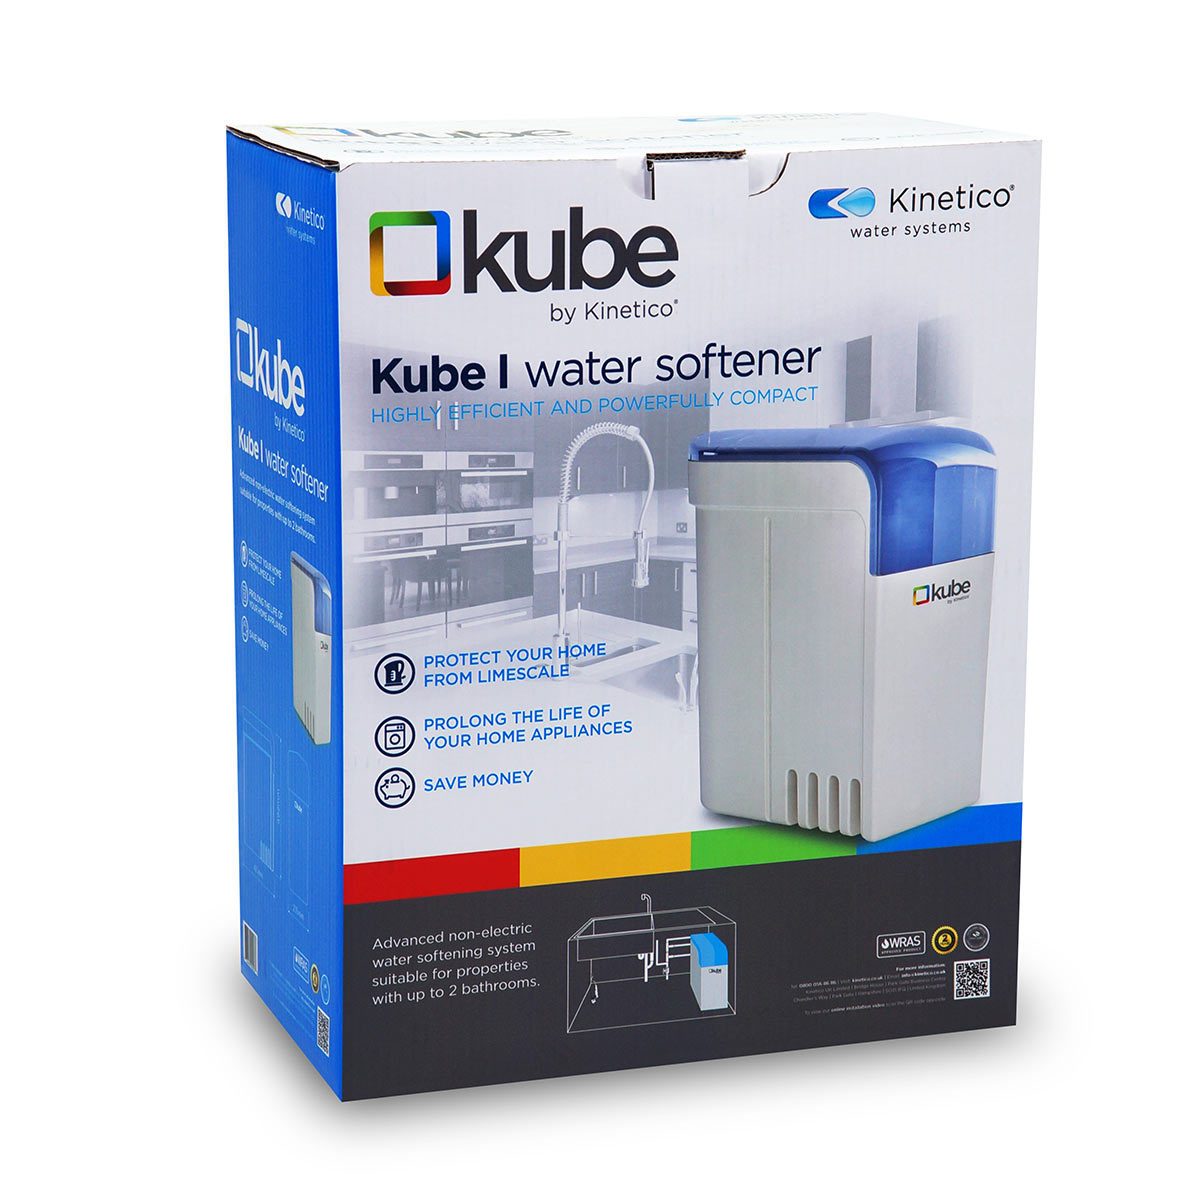 Kinetico Kube 1 Non-Electric Water Softener - For Households with up to 2 Bathrooms - Signature Retail Stores